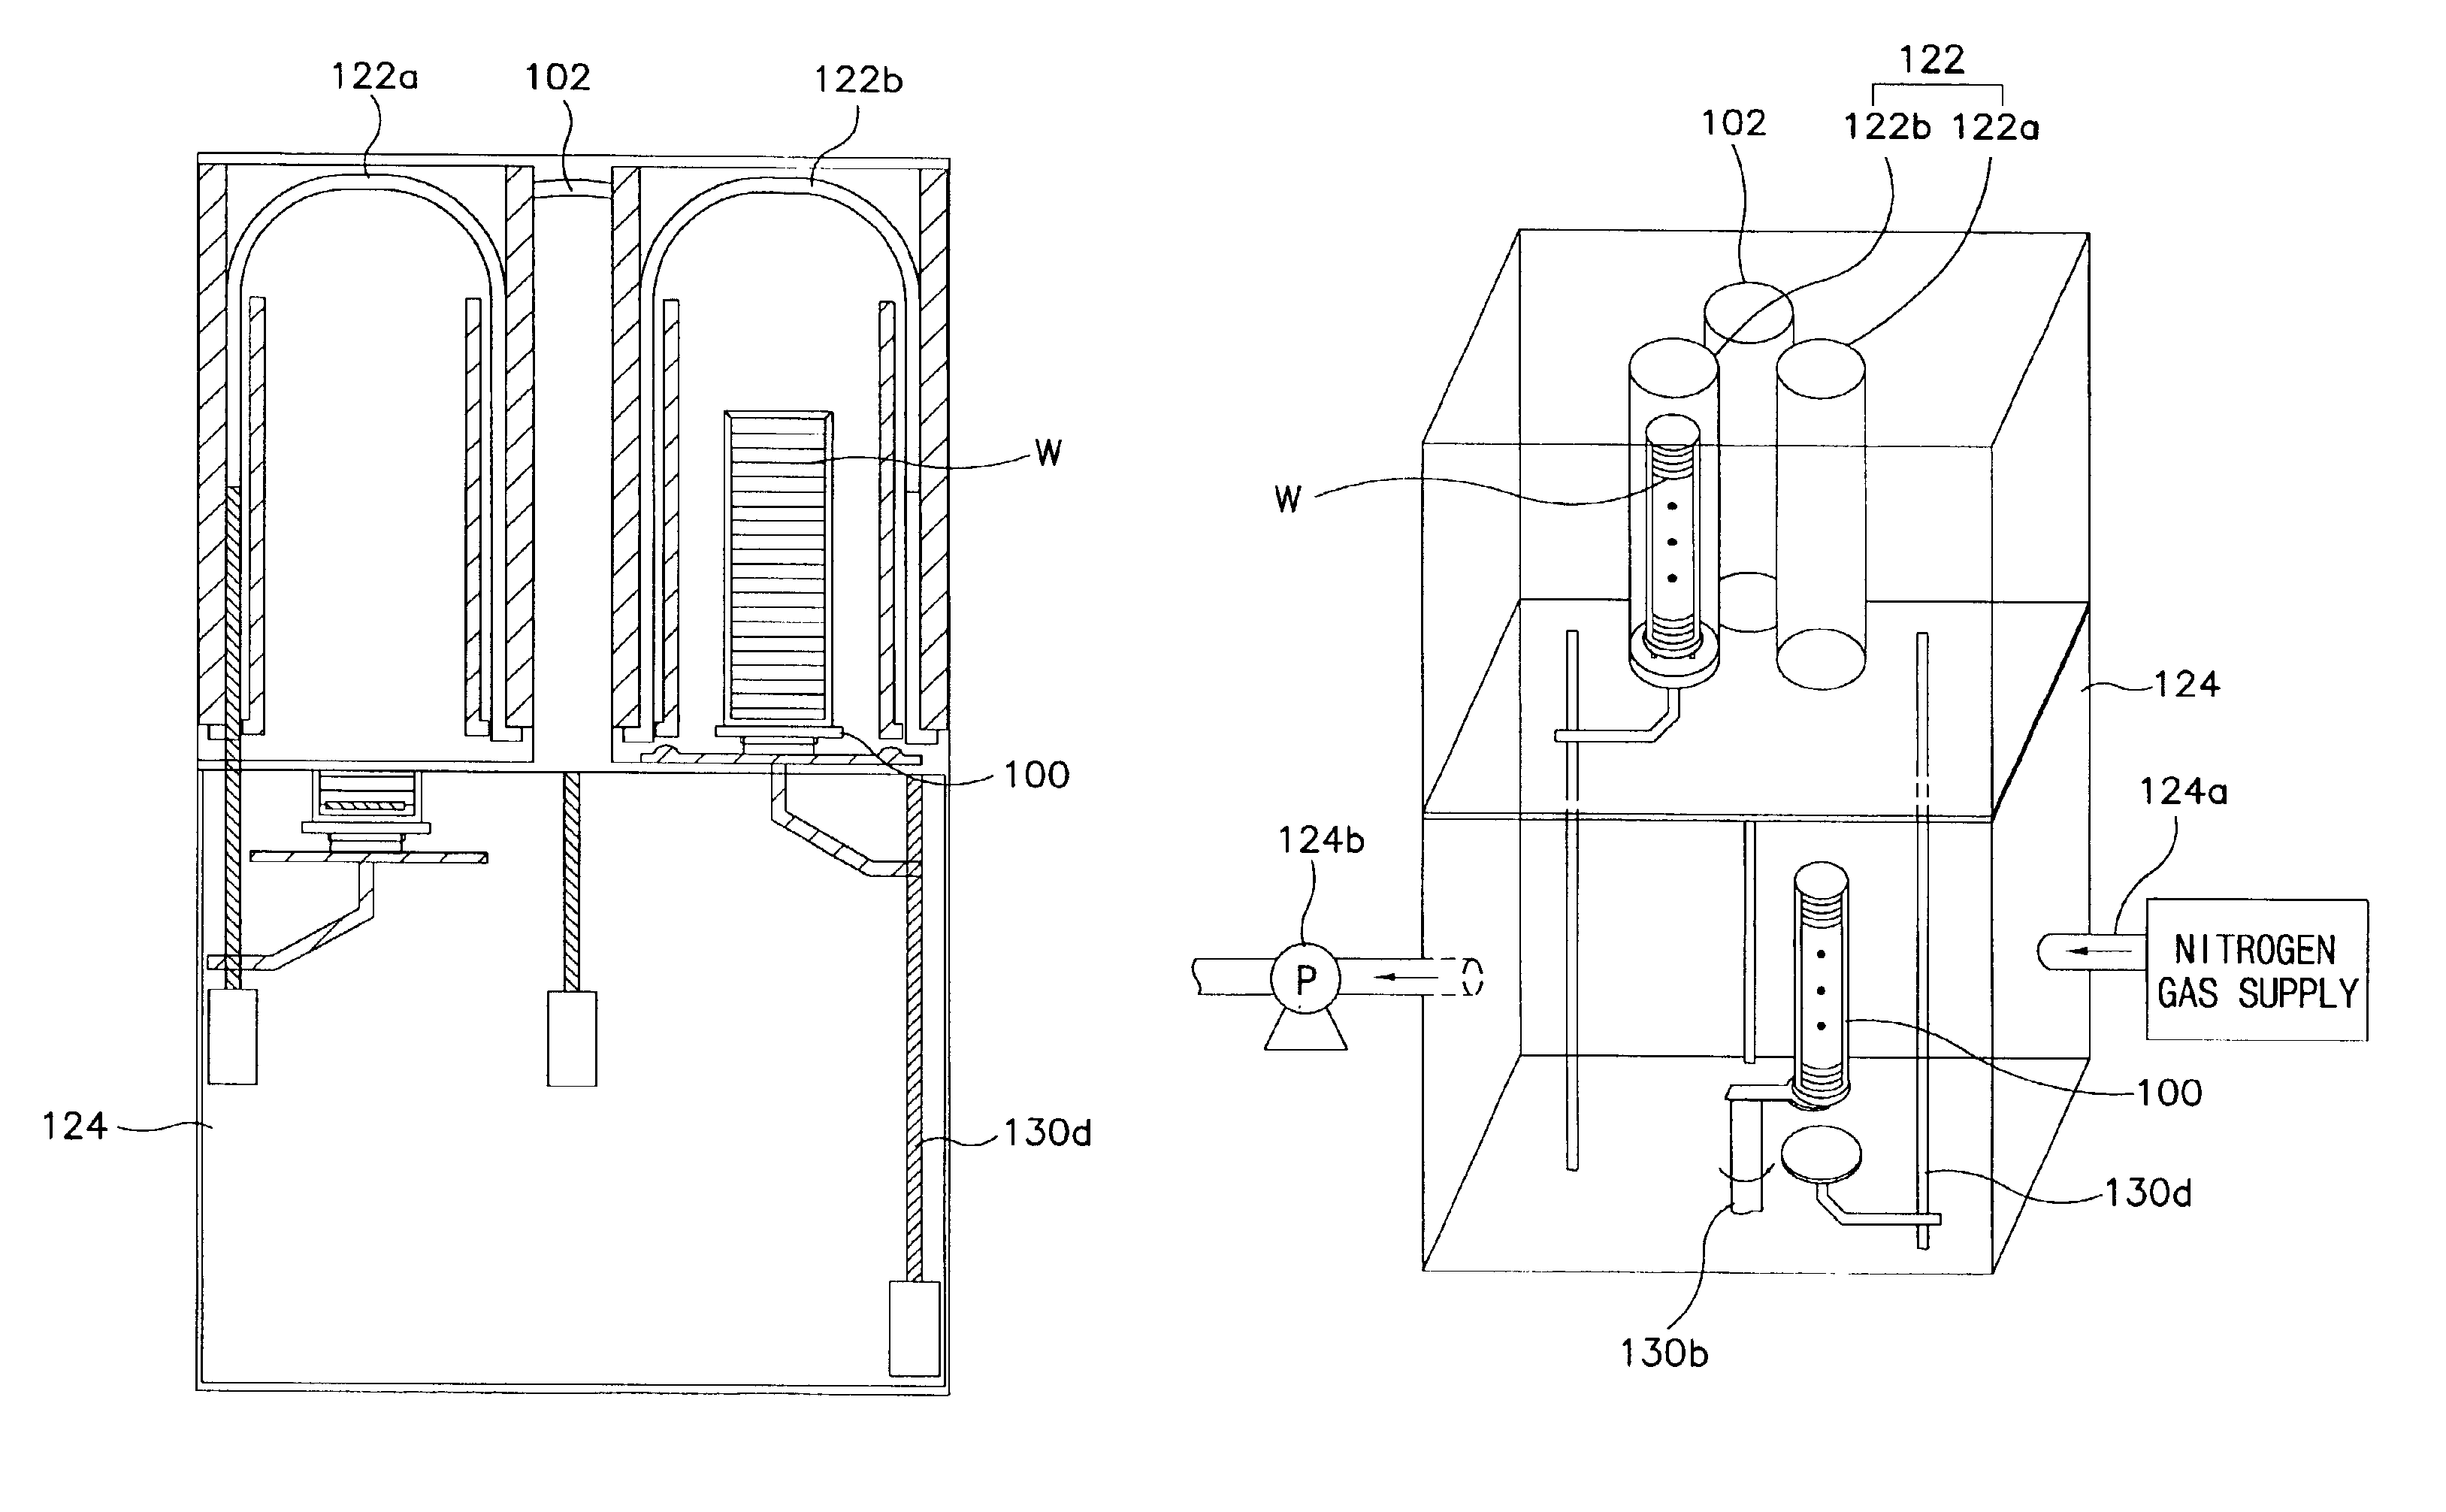 Method of and apparatus for performing sequential processes requiring different amounts of time in the manufacturing of semiconductor devices